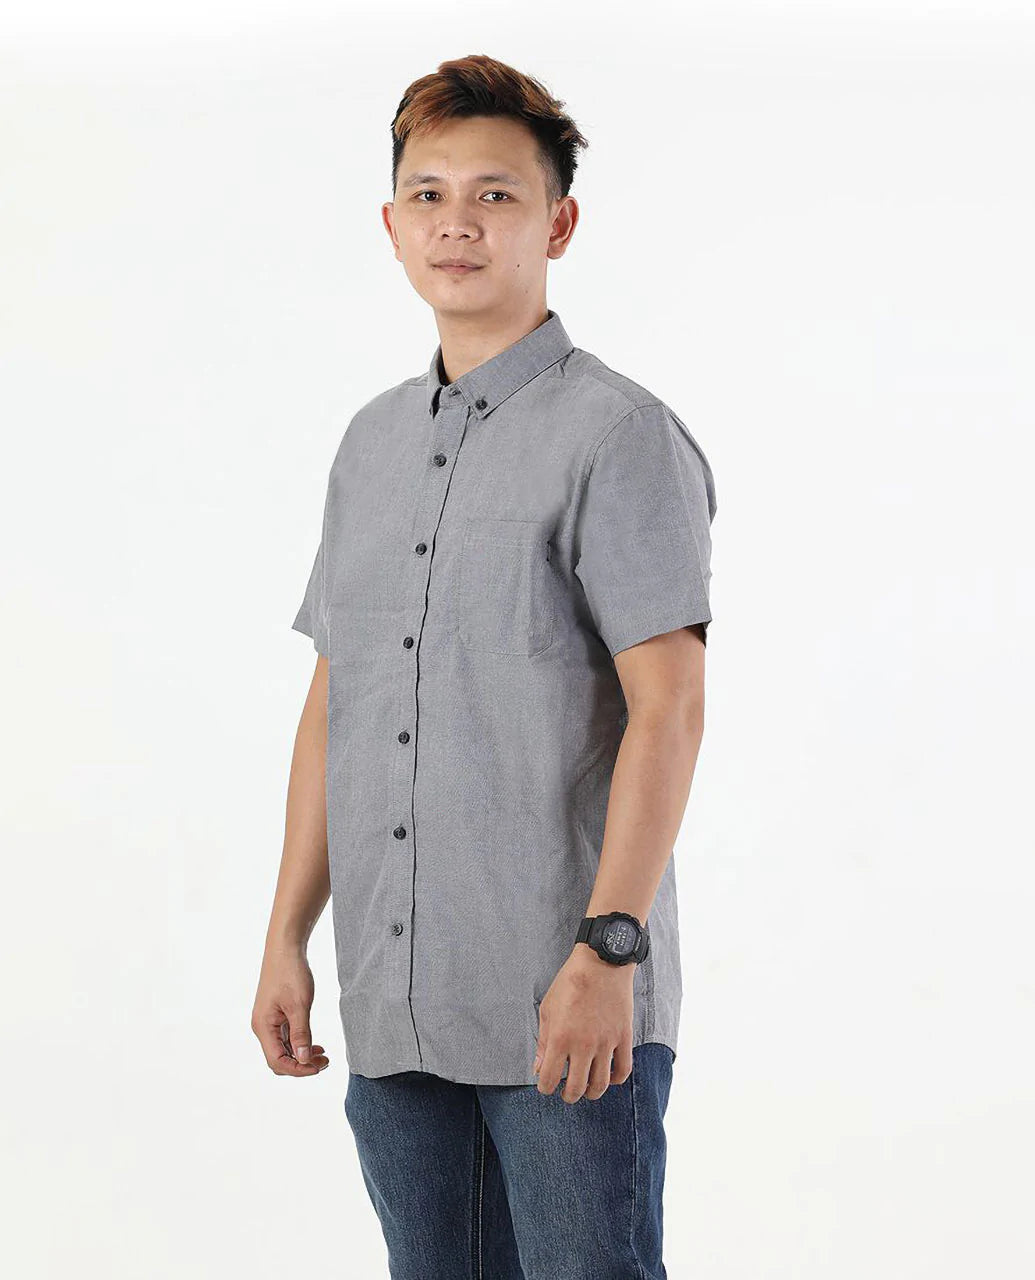 Ourtime Short Sleeve Shirt - Charcoal